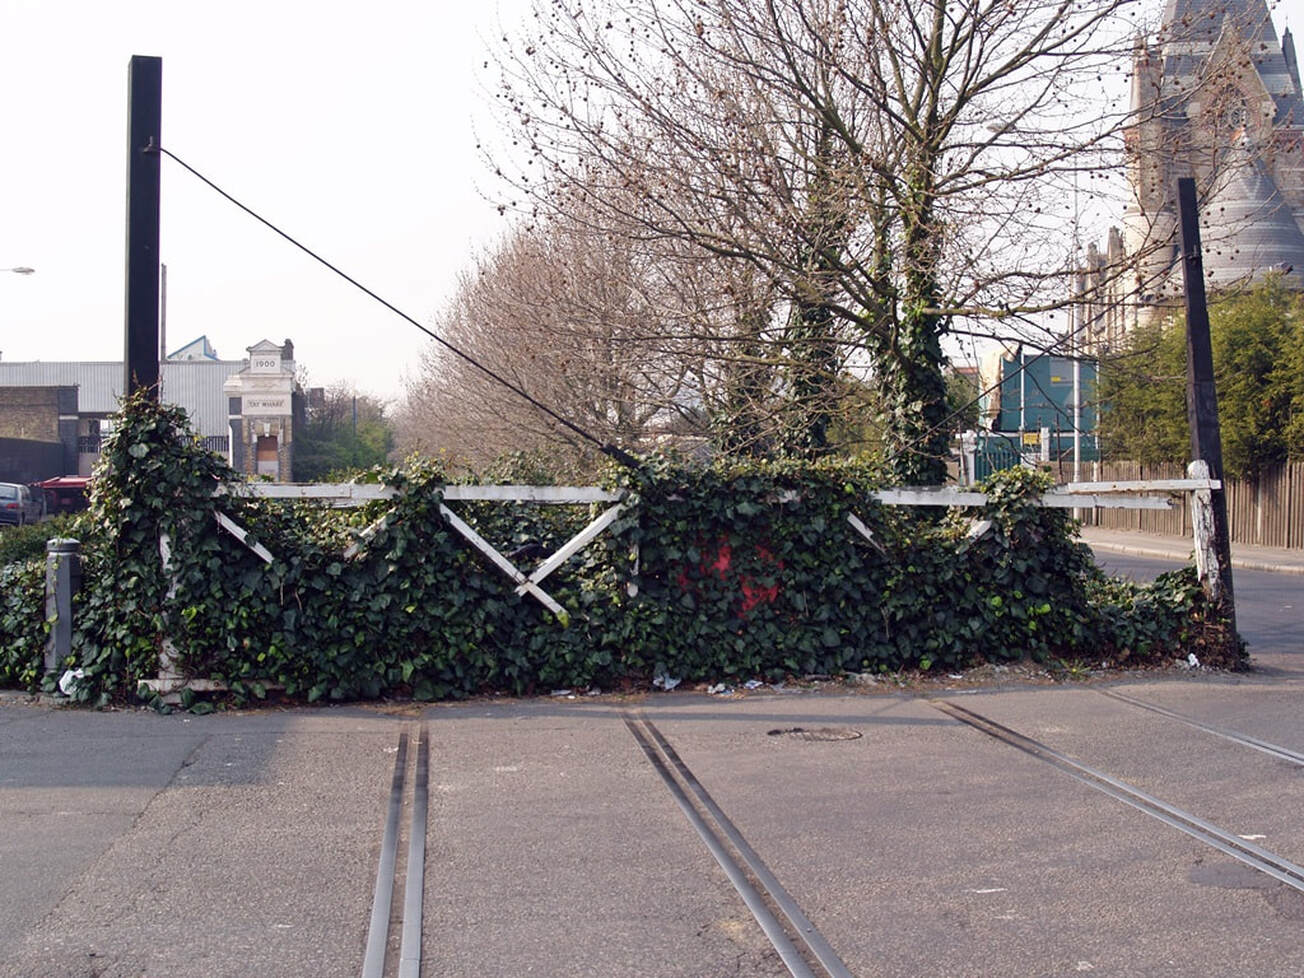 Derelict overgrown wooden level crossing gates at the disused Silvertown Tramway